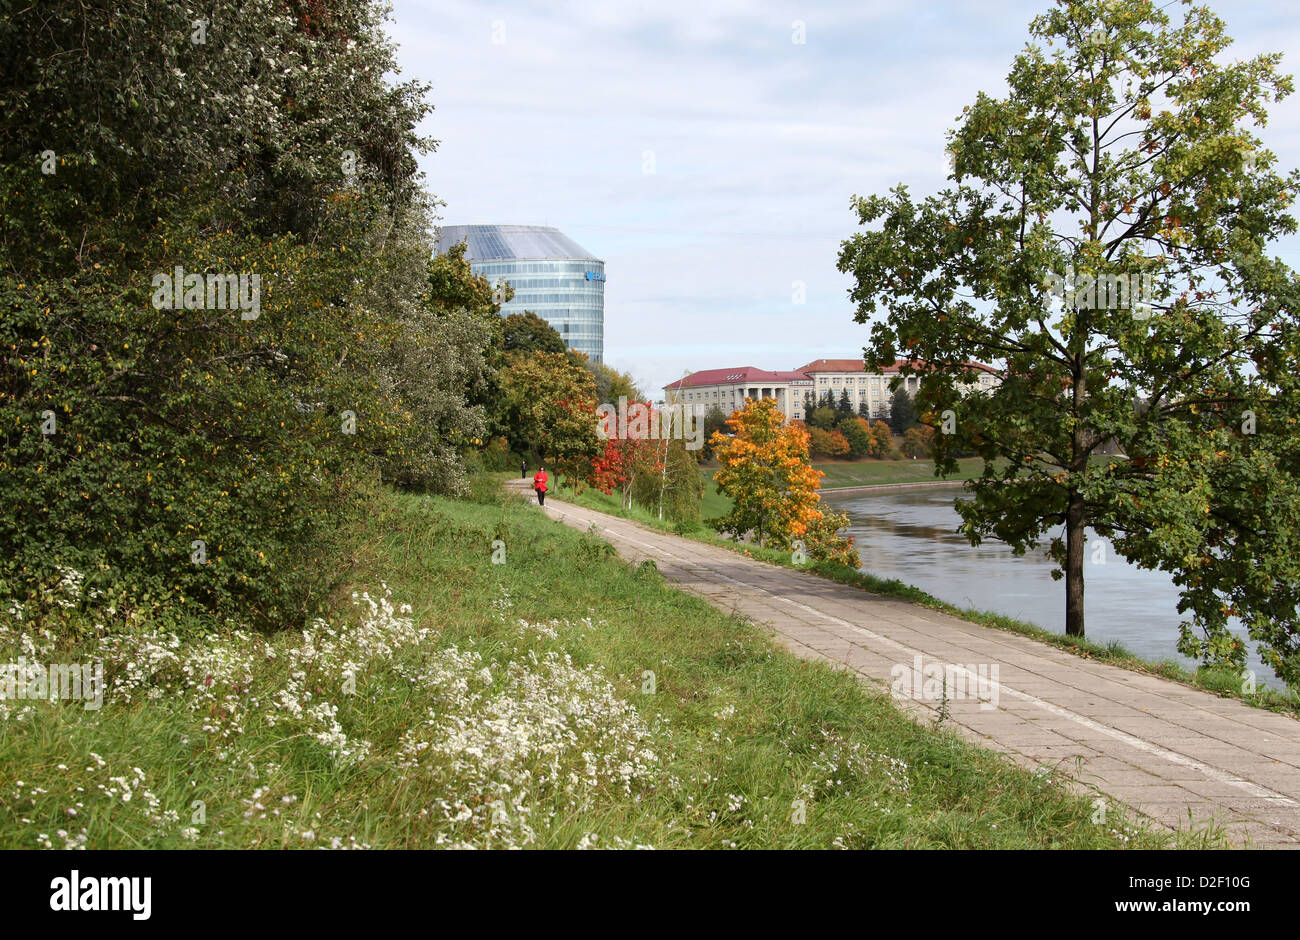 River Neris in the Lithuanian capital city of Vilnius Stock Photo